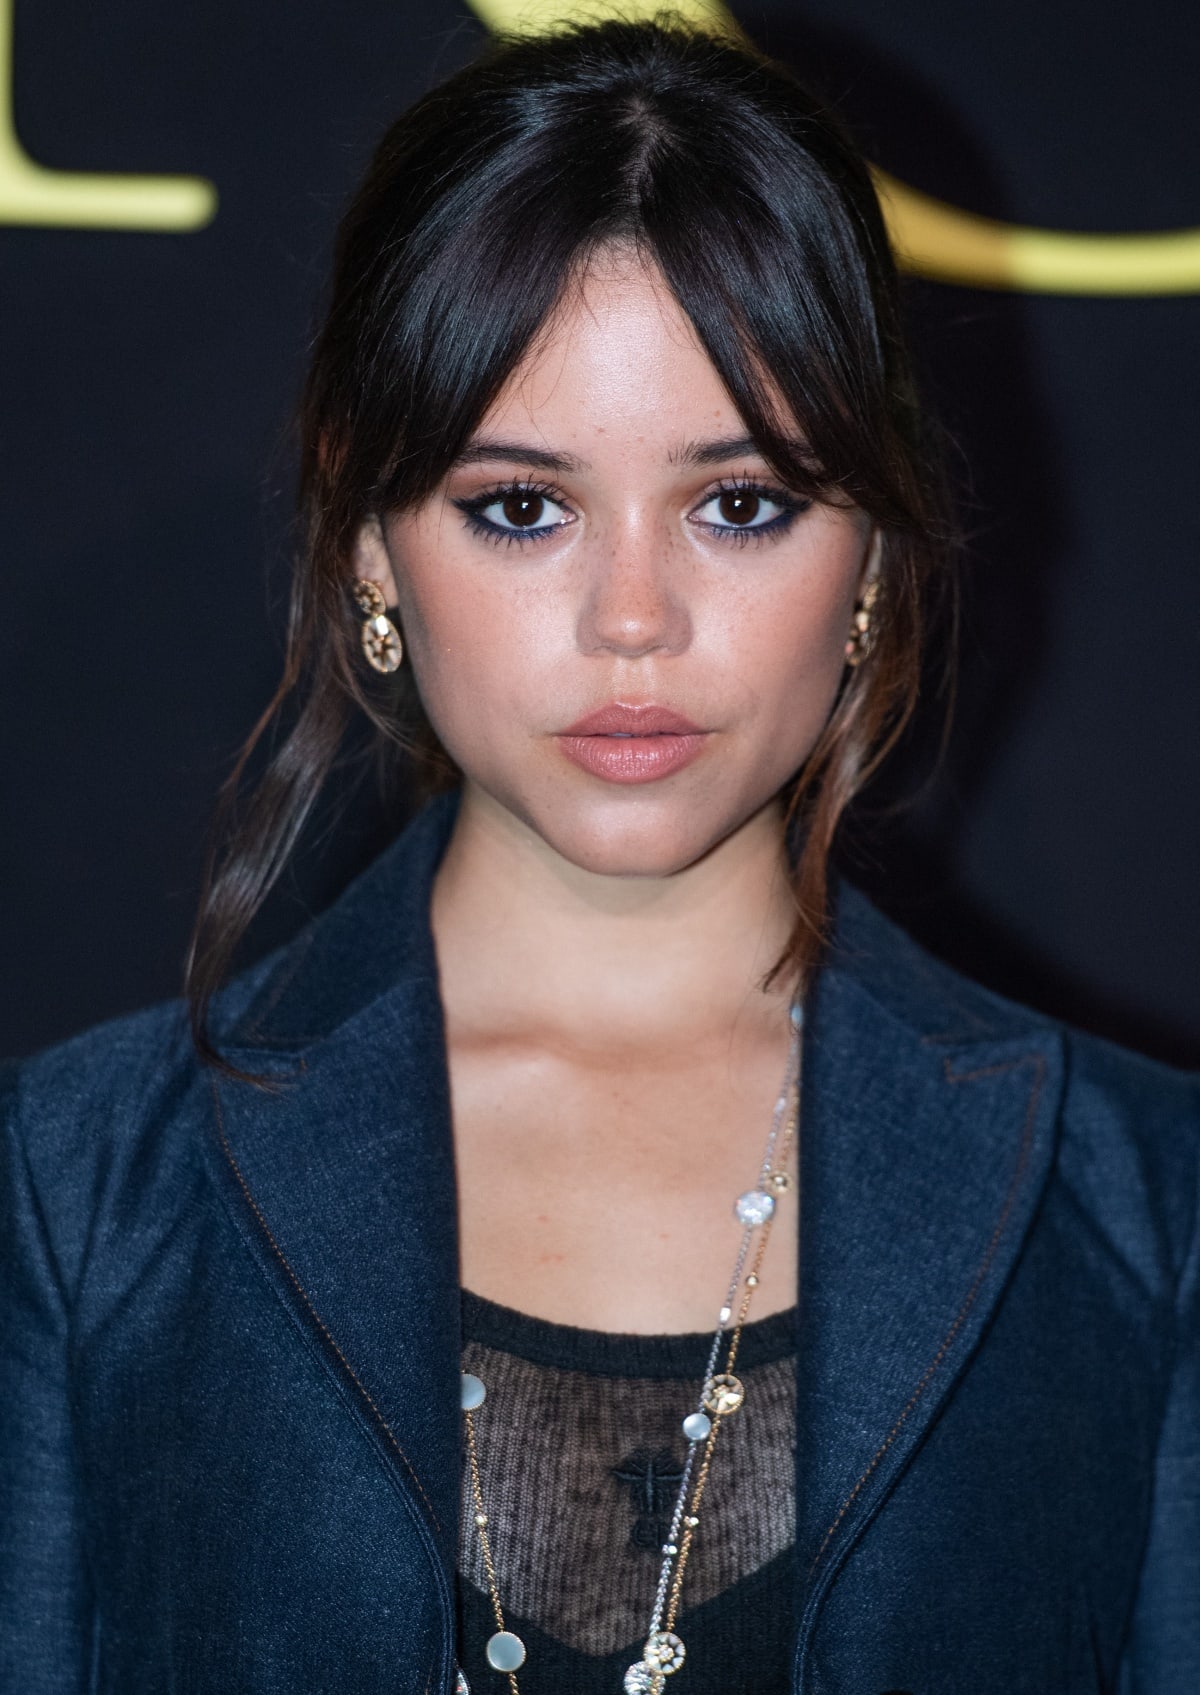 Jenna Ortega’s beauty look consisted of her signature curtain-banged fringe, a peachy-pink lip, and Dior Rose des Vents jewelry